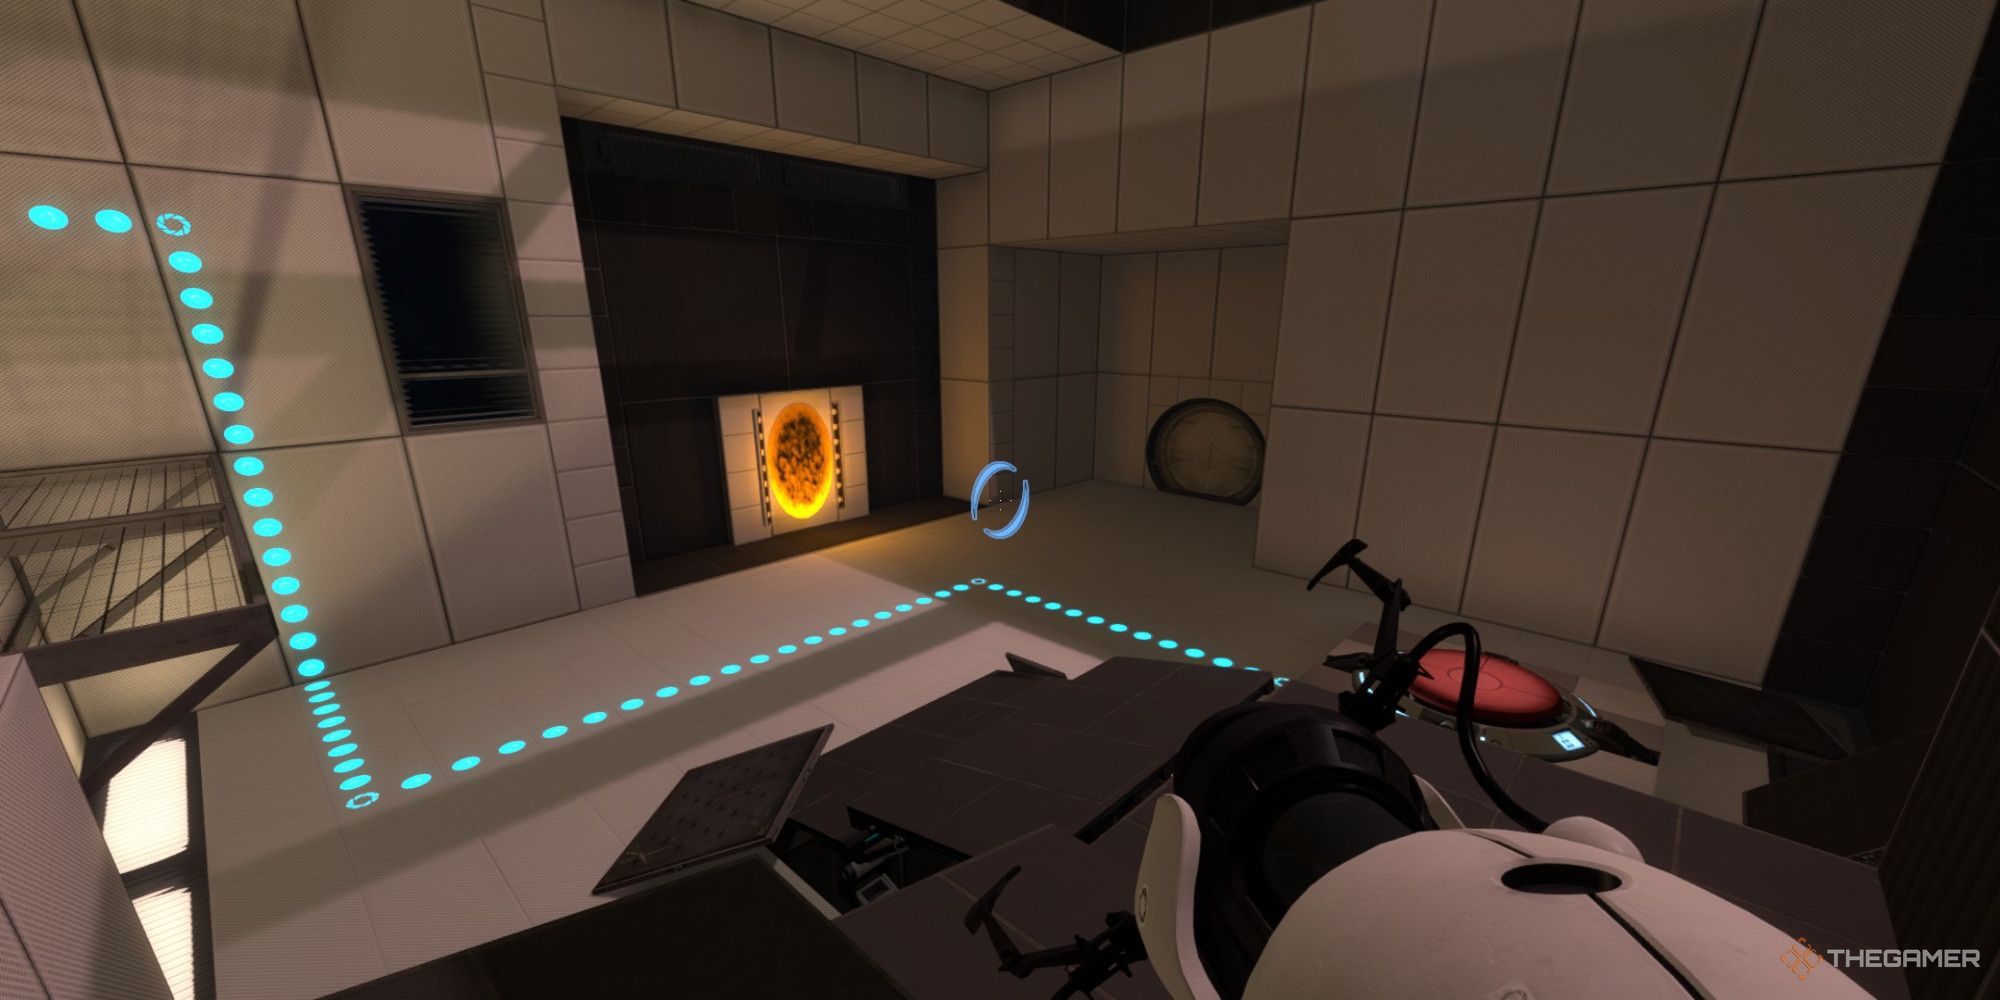 A screenshot from Portal: Revolution showing the player character aiming towards an inactive orange portal